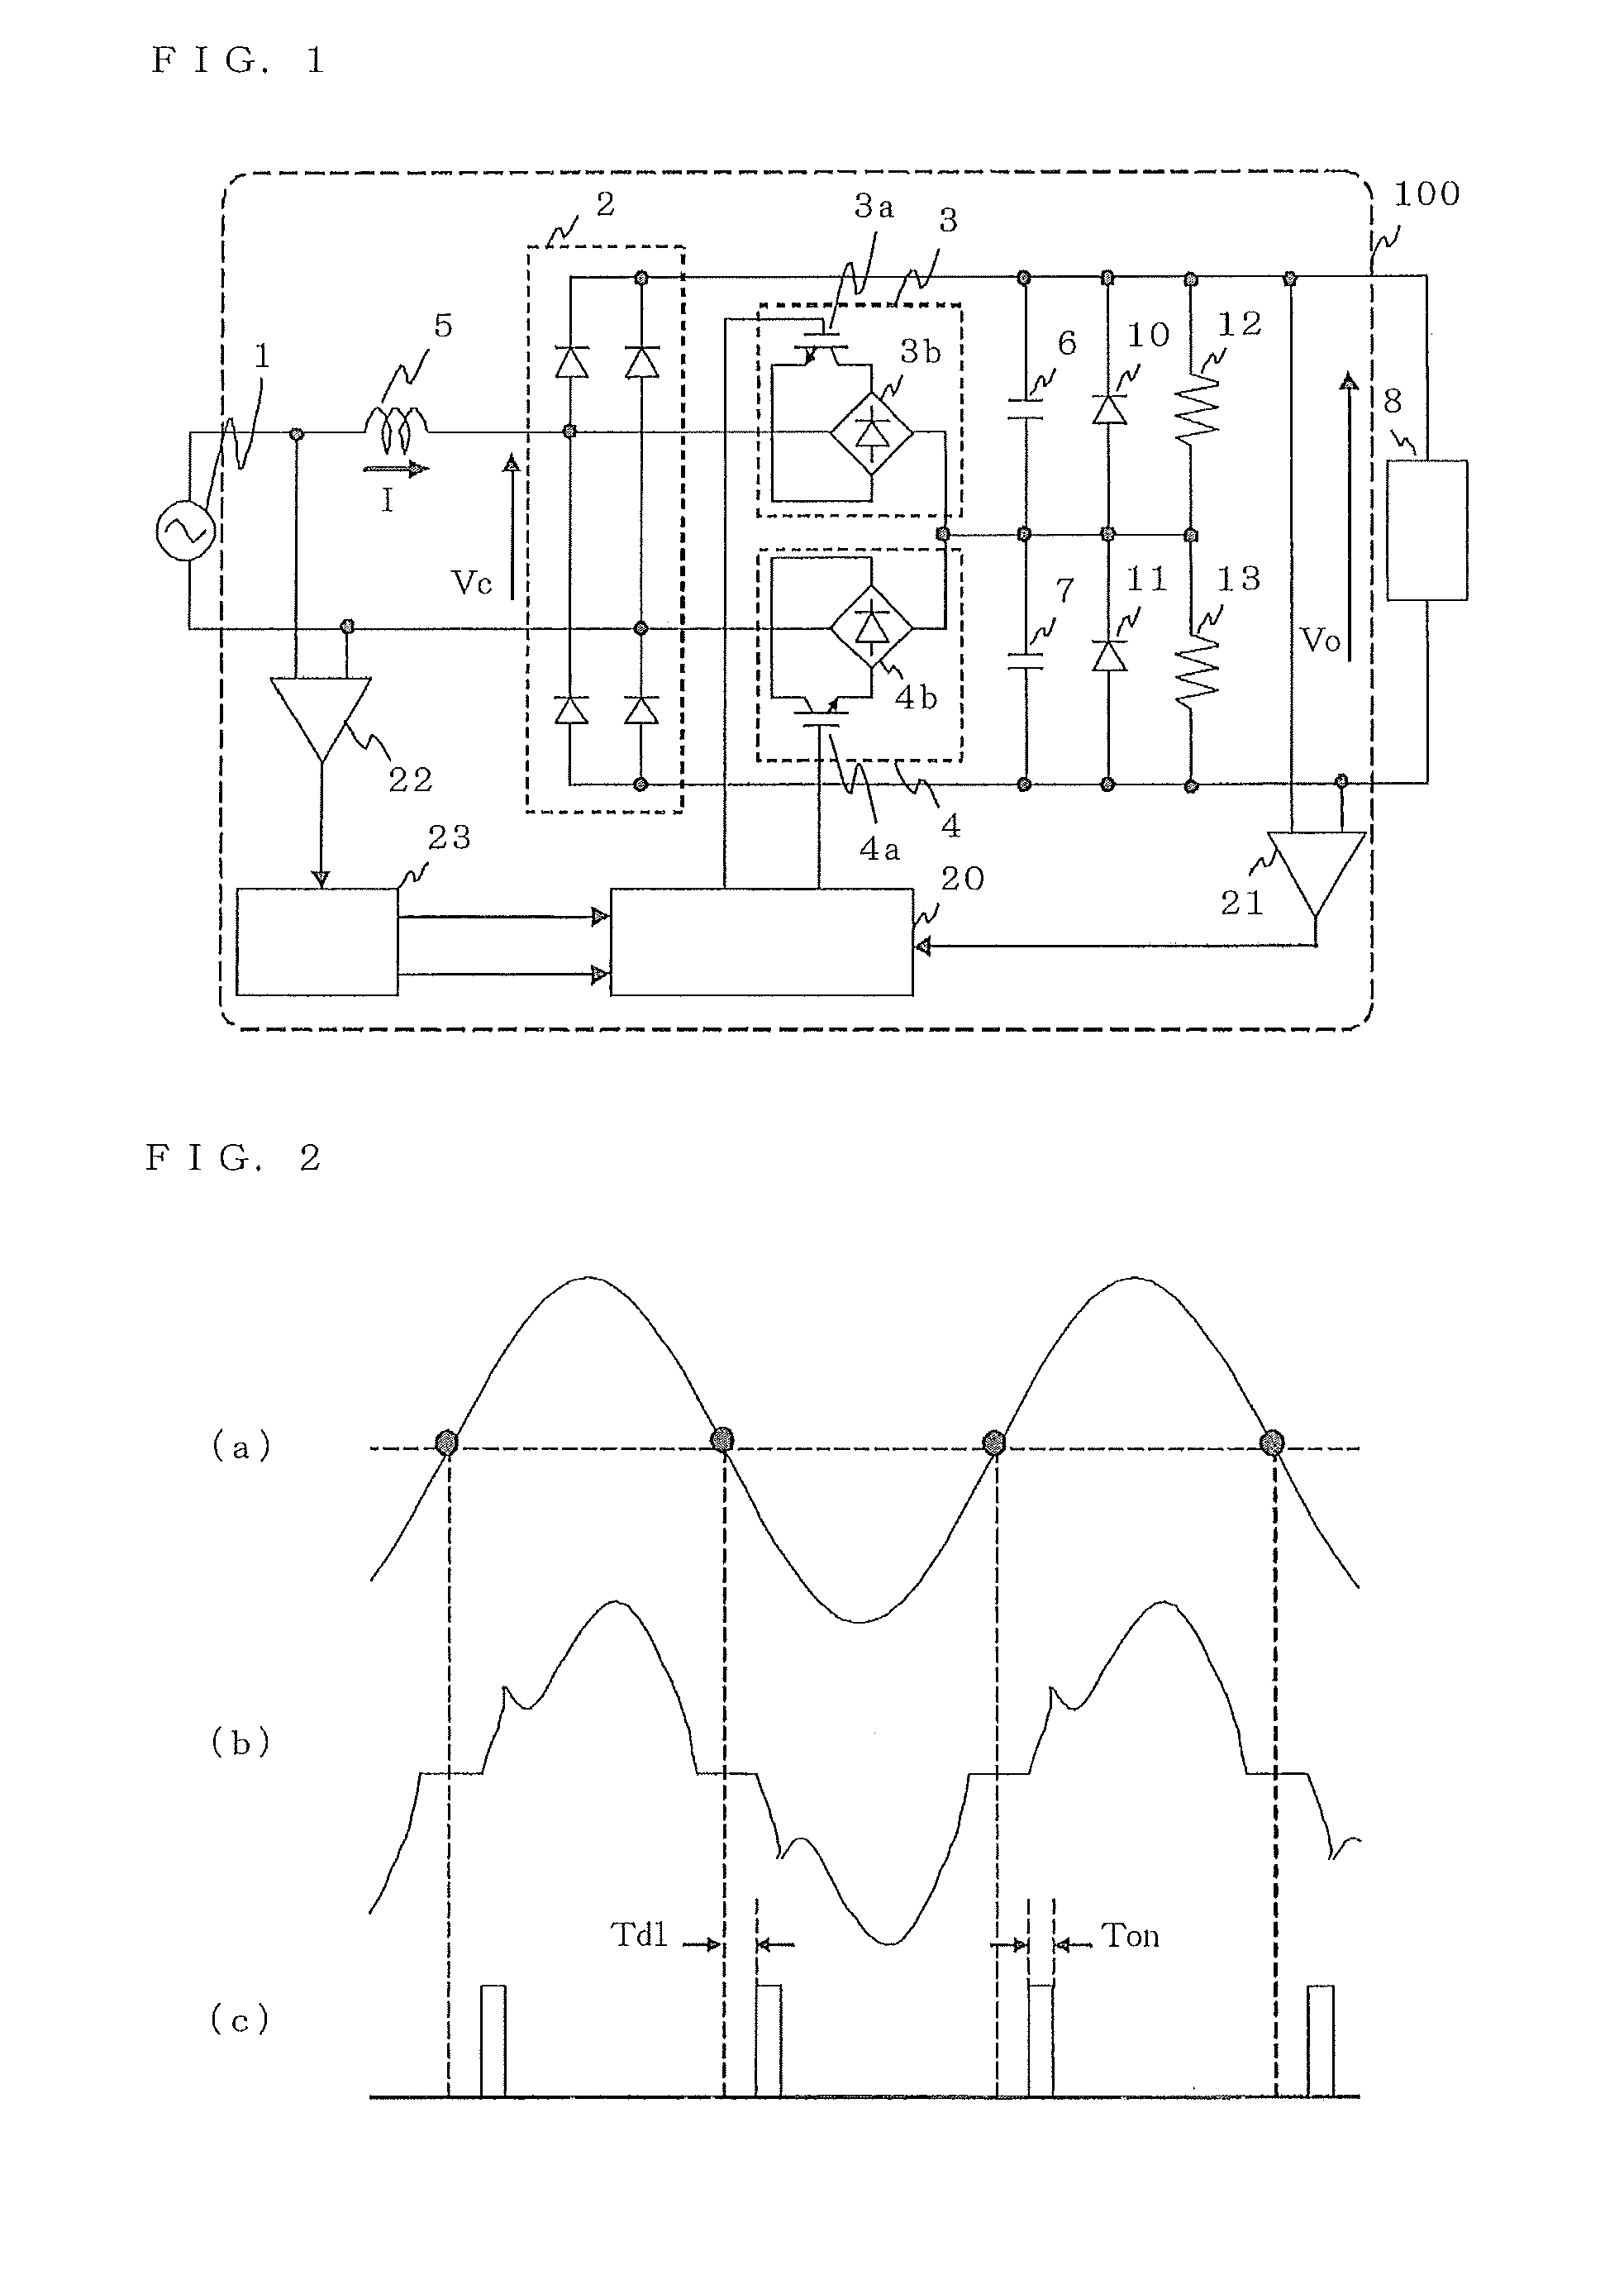 Ac-dc converter, method of controlling the same, motor driver, compressor driver, air-conditioner, and heat pump type water heater